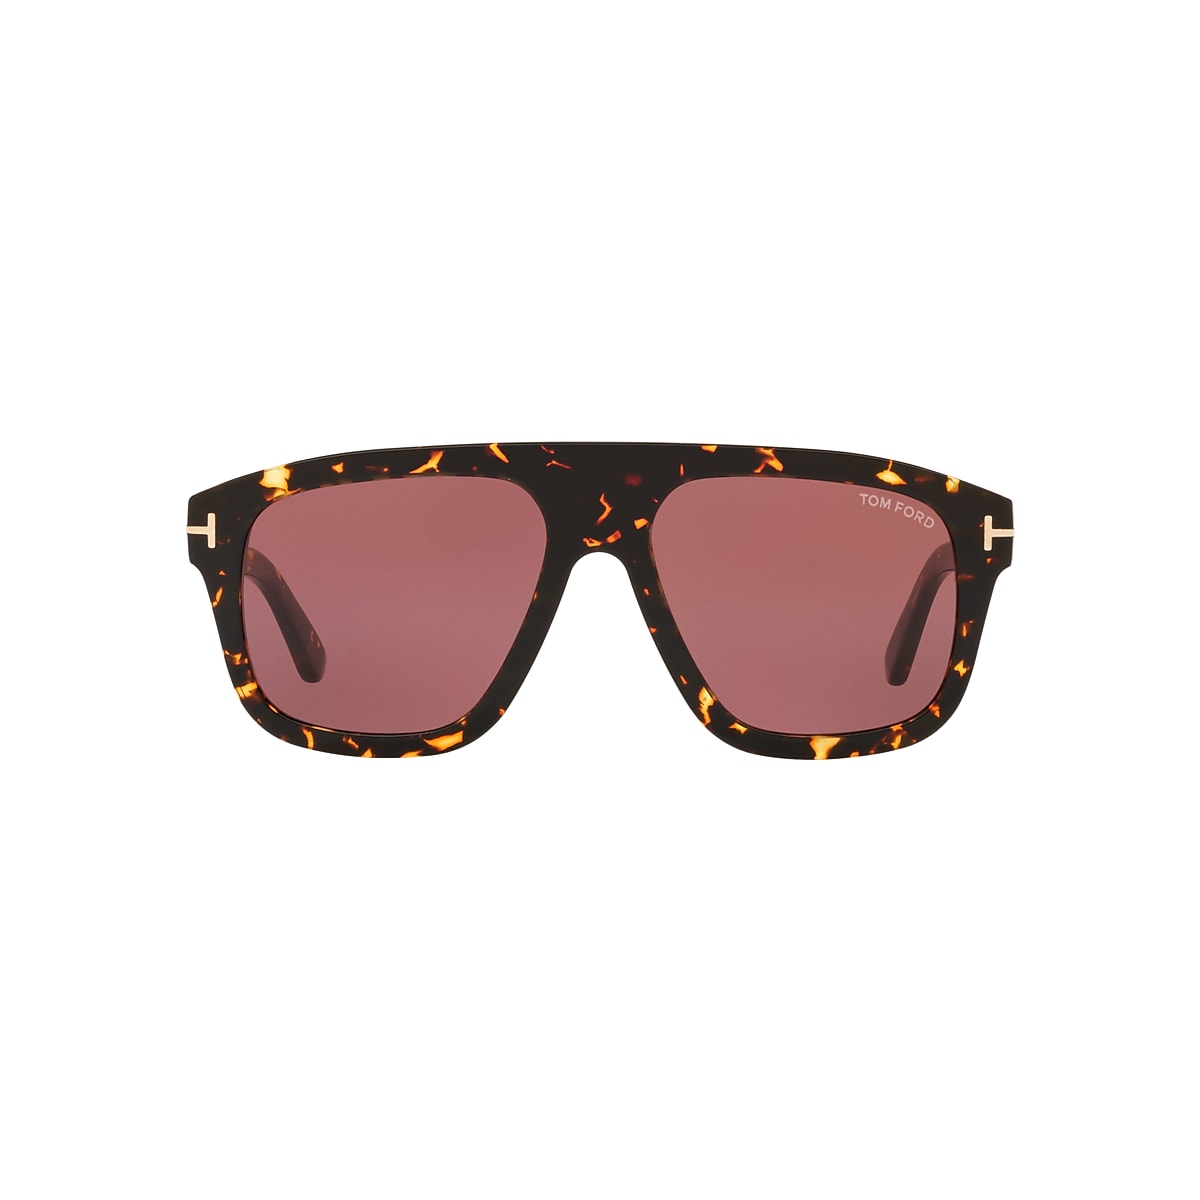 Total 107+ imagen tom ford most popular sunglasses - Abzlocal.mx